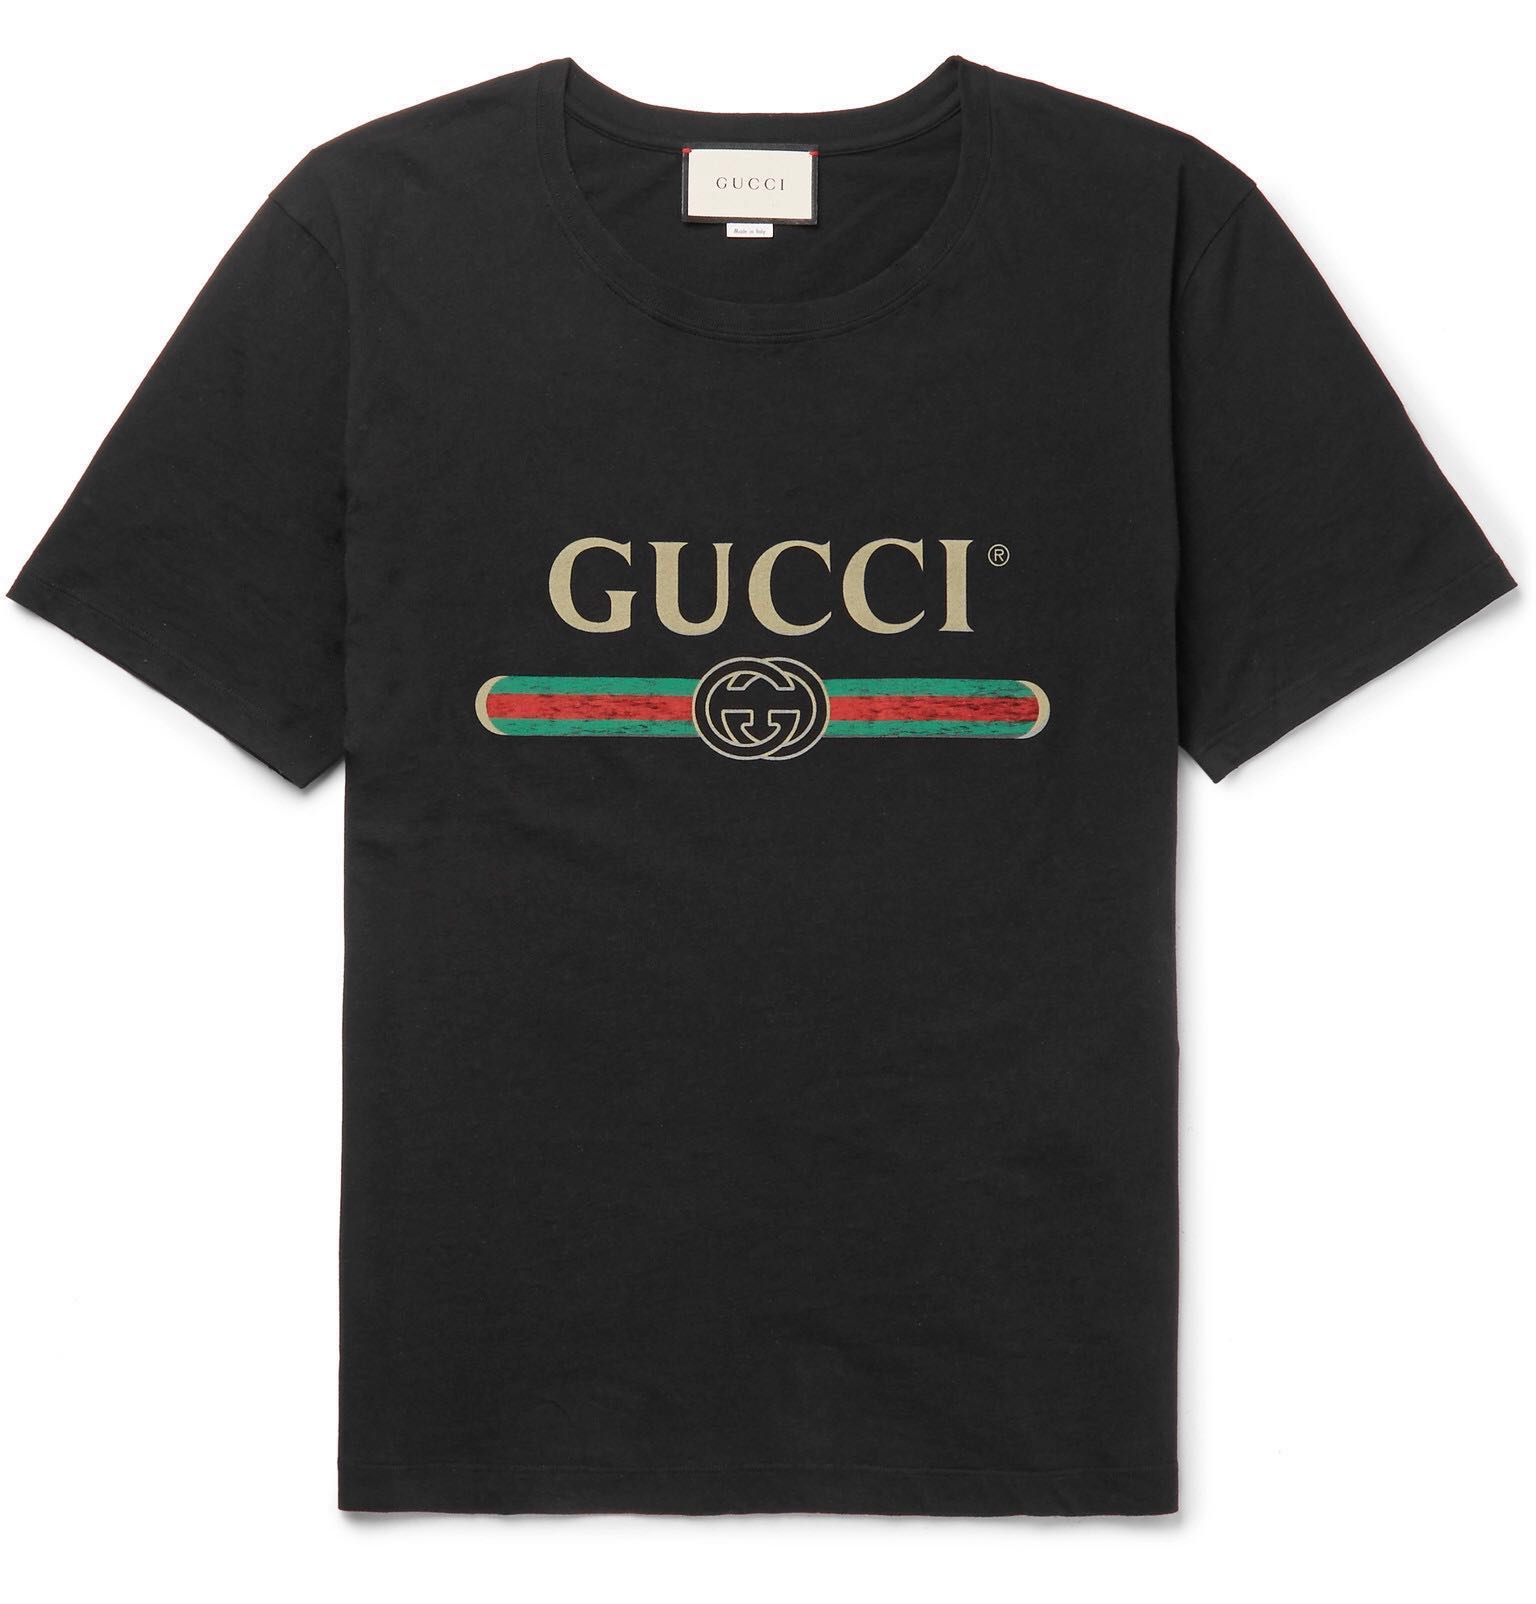 Fake Gucci Polo Shirt Vs Real - Prism Contractors & Engineers